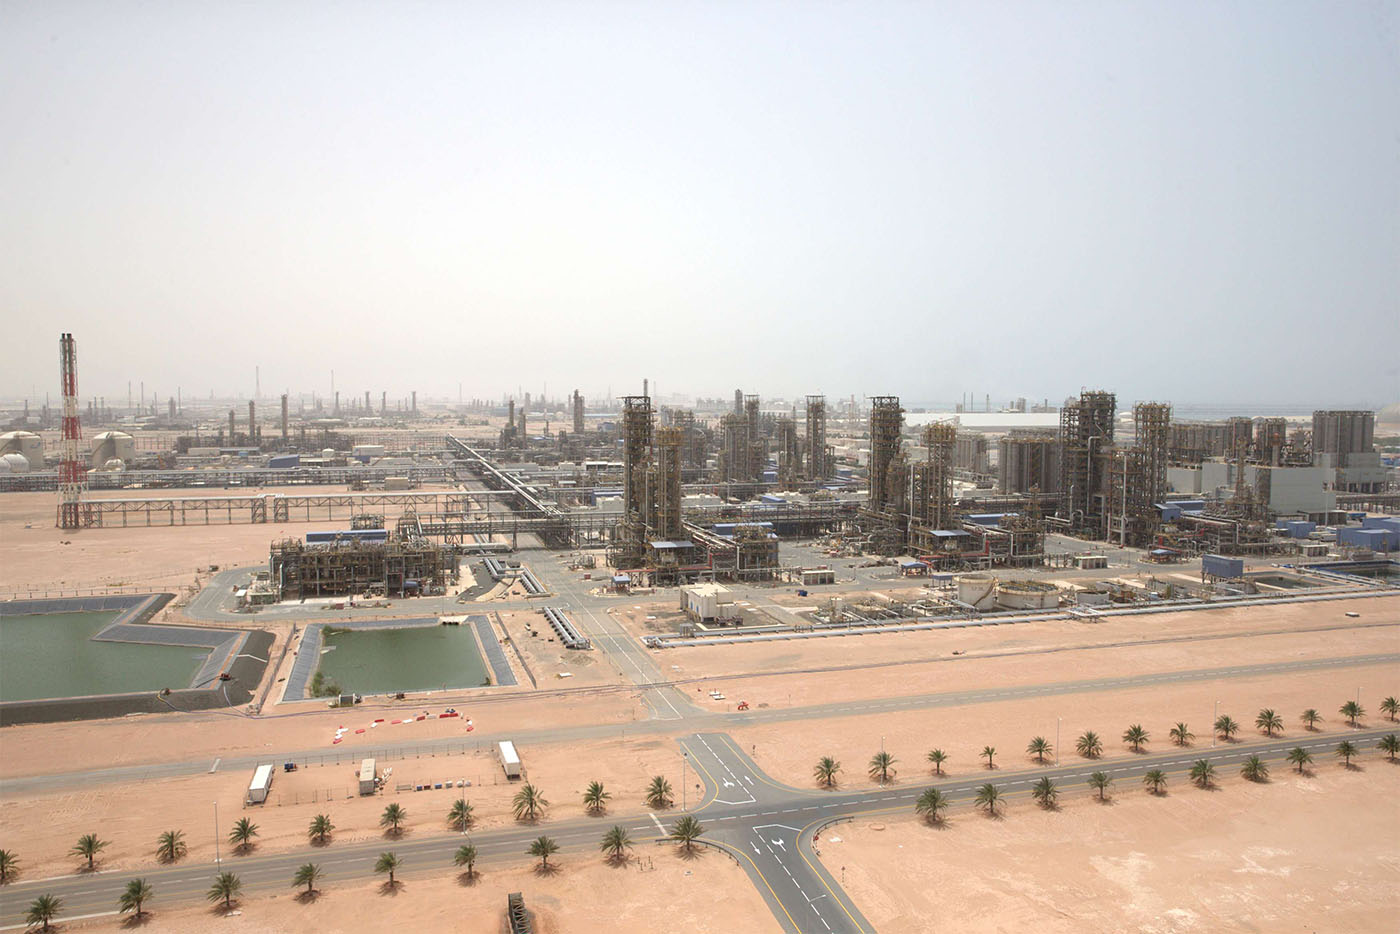 General view of the Borouge petrochemical facility at ADNOC's Ruwais Industrial Complex in Ruwais